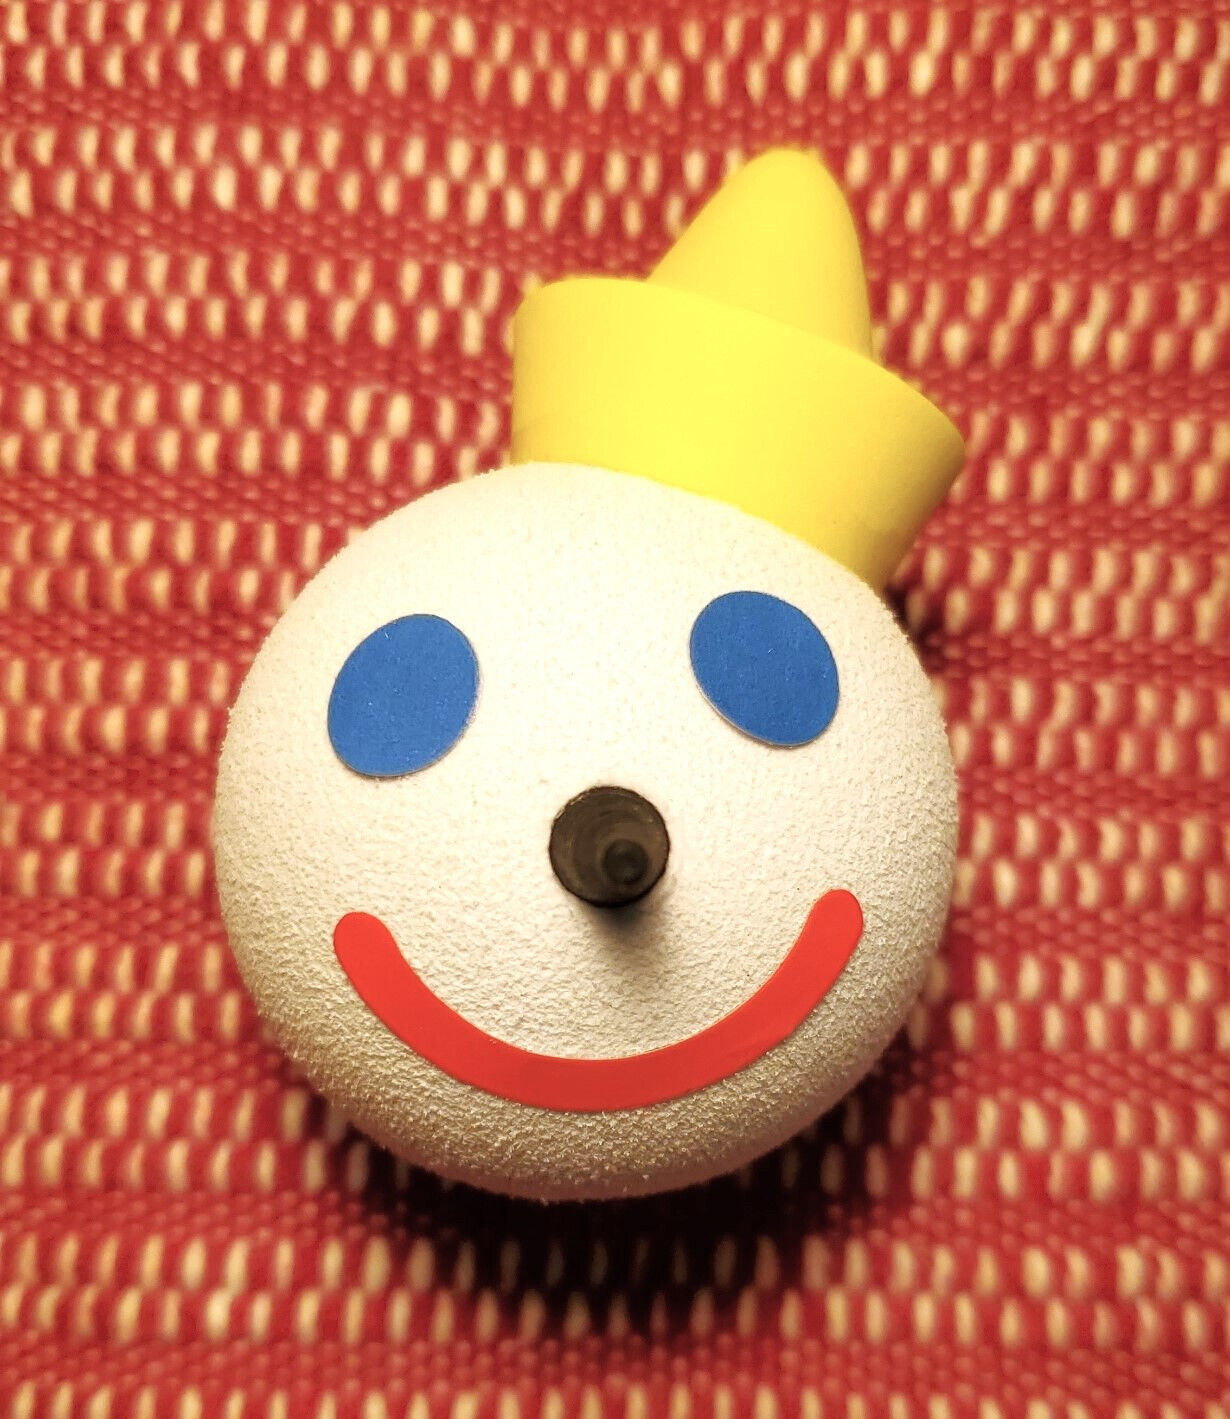 Jack In The Box Antenna Ball BOGO-BUY ONE GET ONE FREE